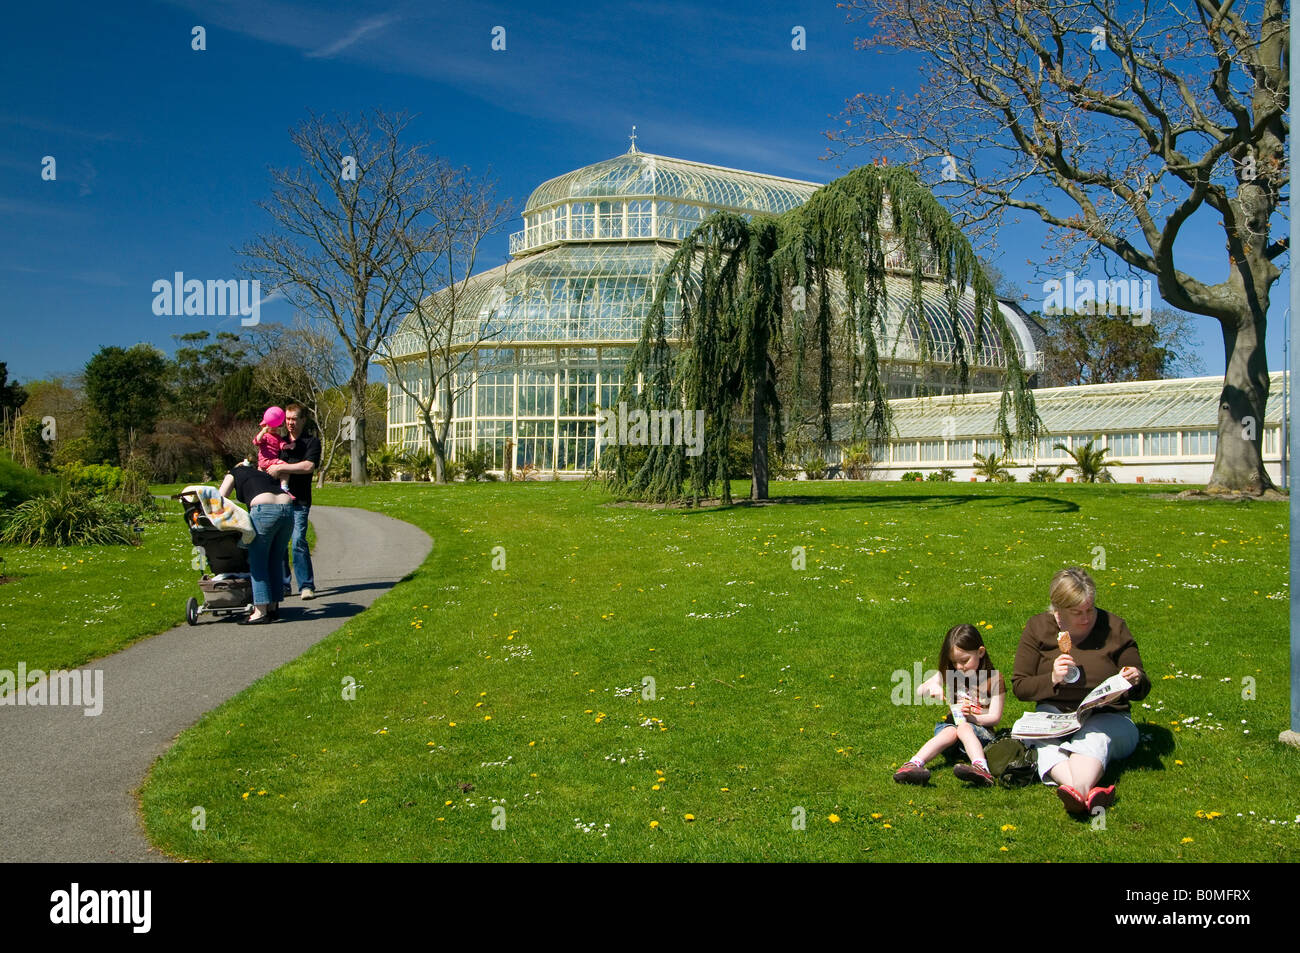 The Orchid Palm and Cactus greenhouses at the National Botanic Gardens Glasnevin Dublin Ireland Stock Photo